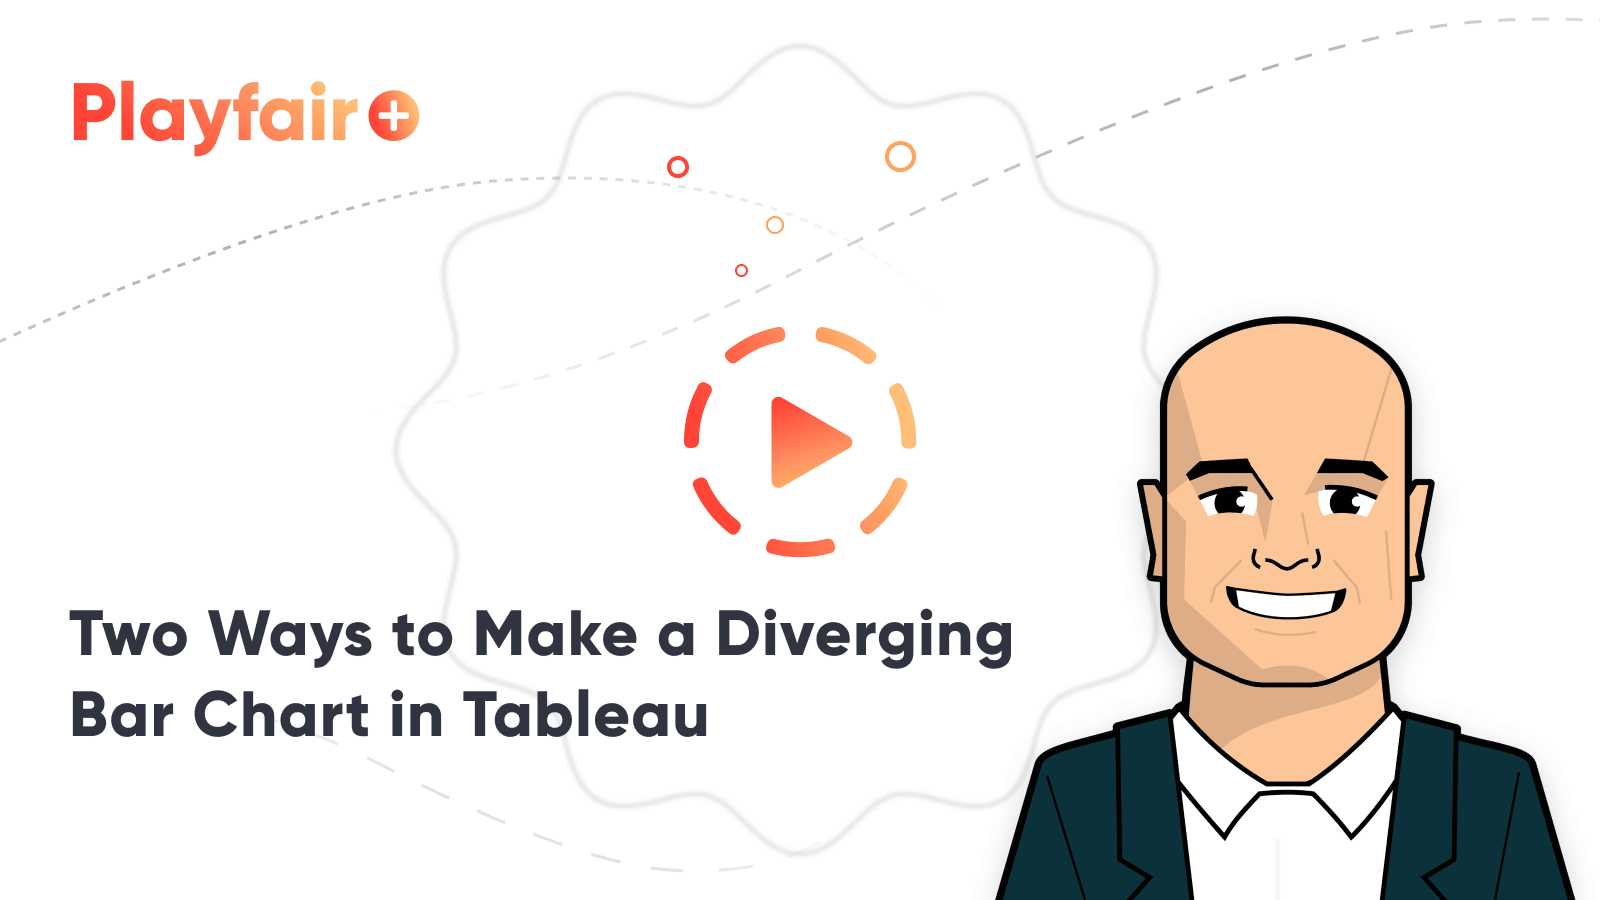 Two Ways to Make a Diverging Bar Chart in Tableau